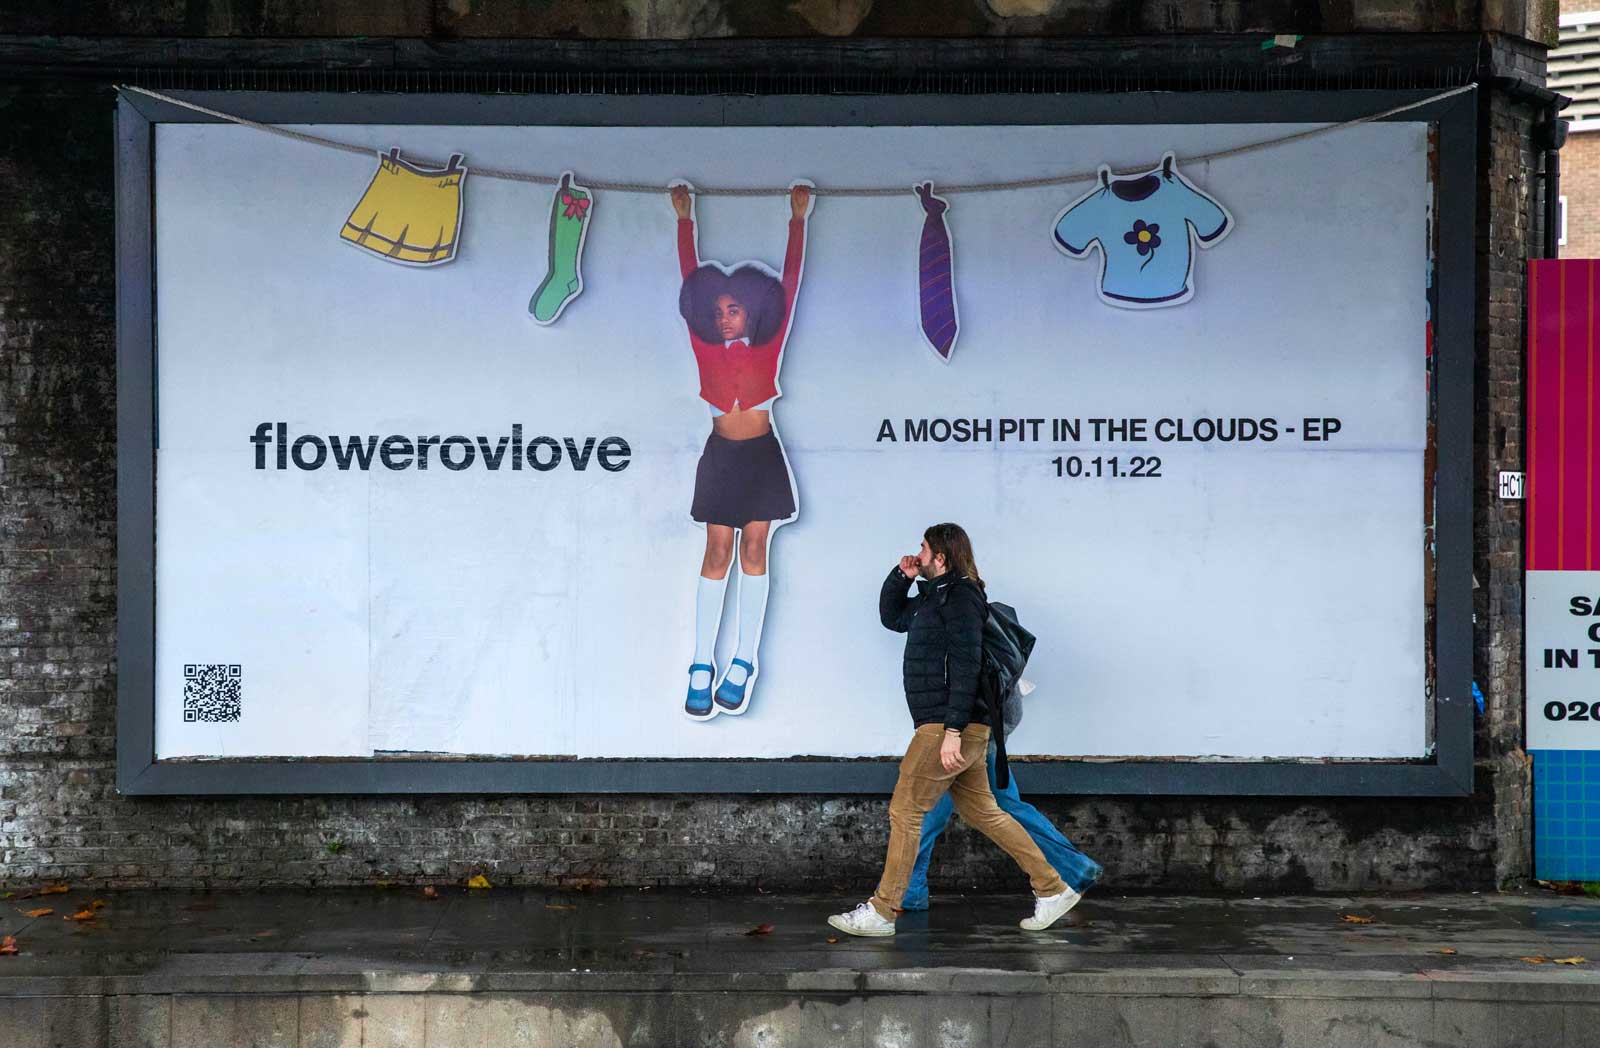 Flowerovlove: A Mosh Pit In The Clouds